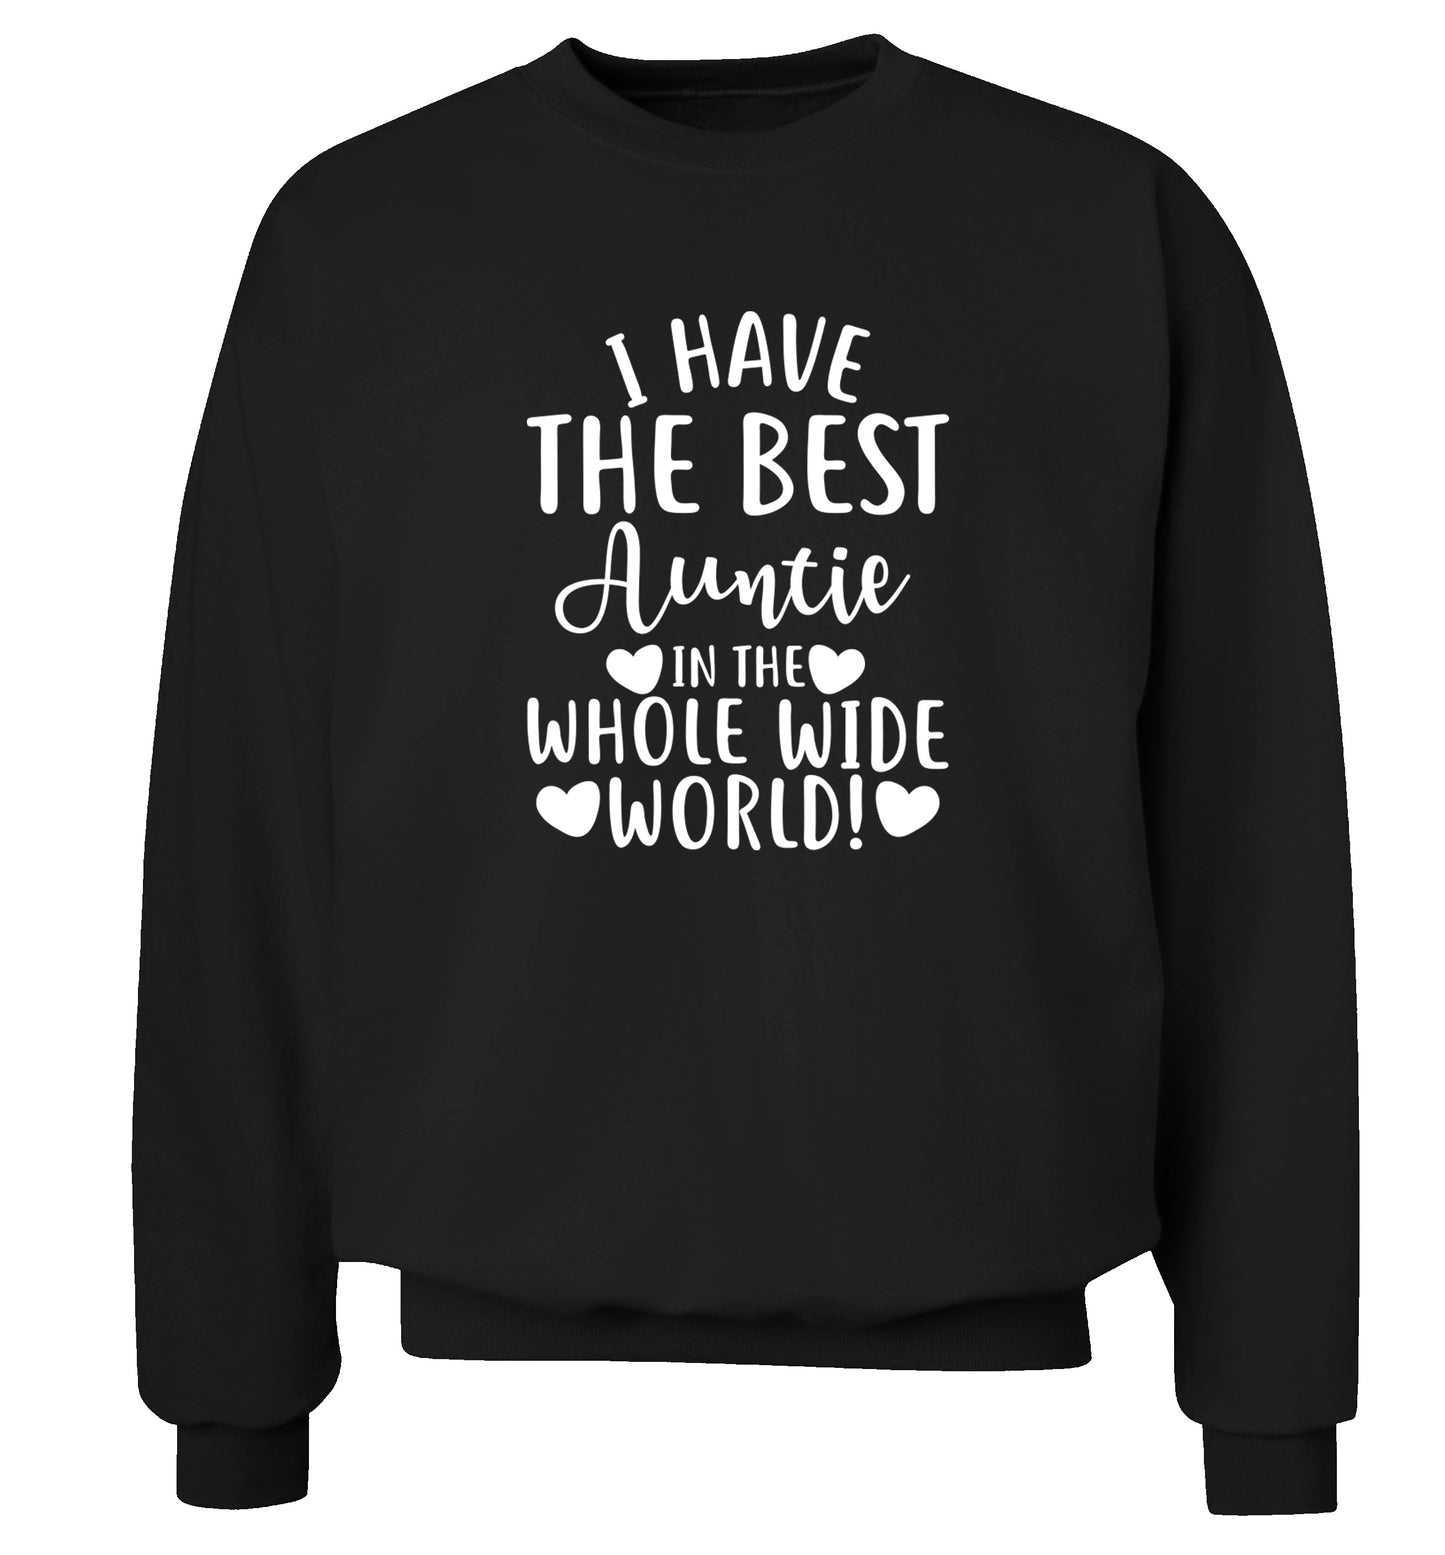 I have the best auntie in the whole wide world! Adult's unisex black Sweater 2XL